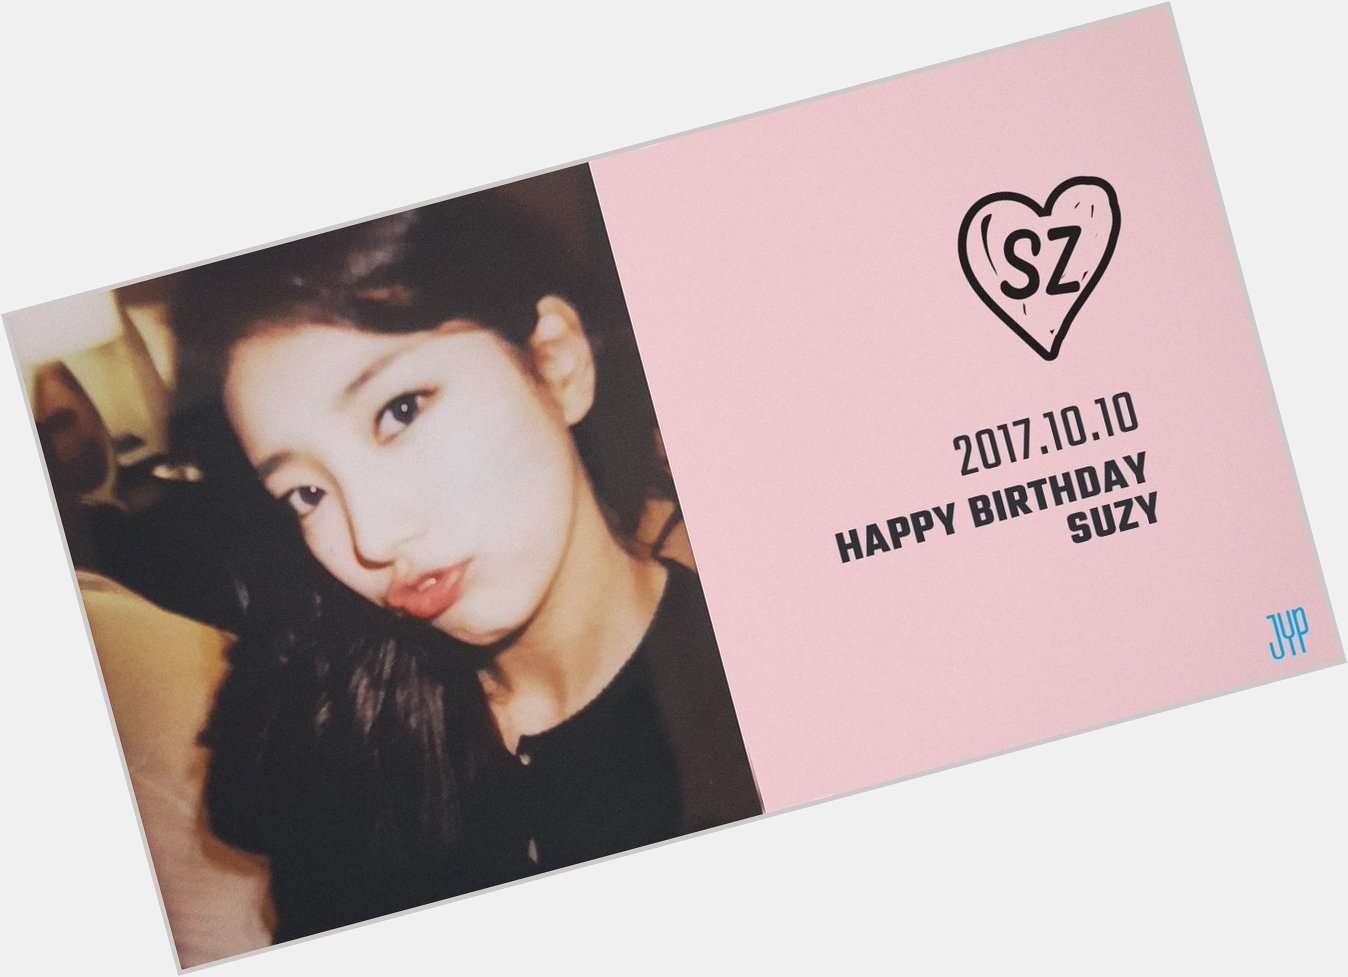 Happy birthday my nation\s first love Bae Suzy! Keep up the good work, fighting!  